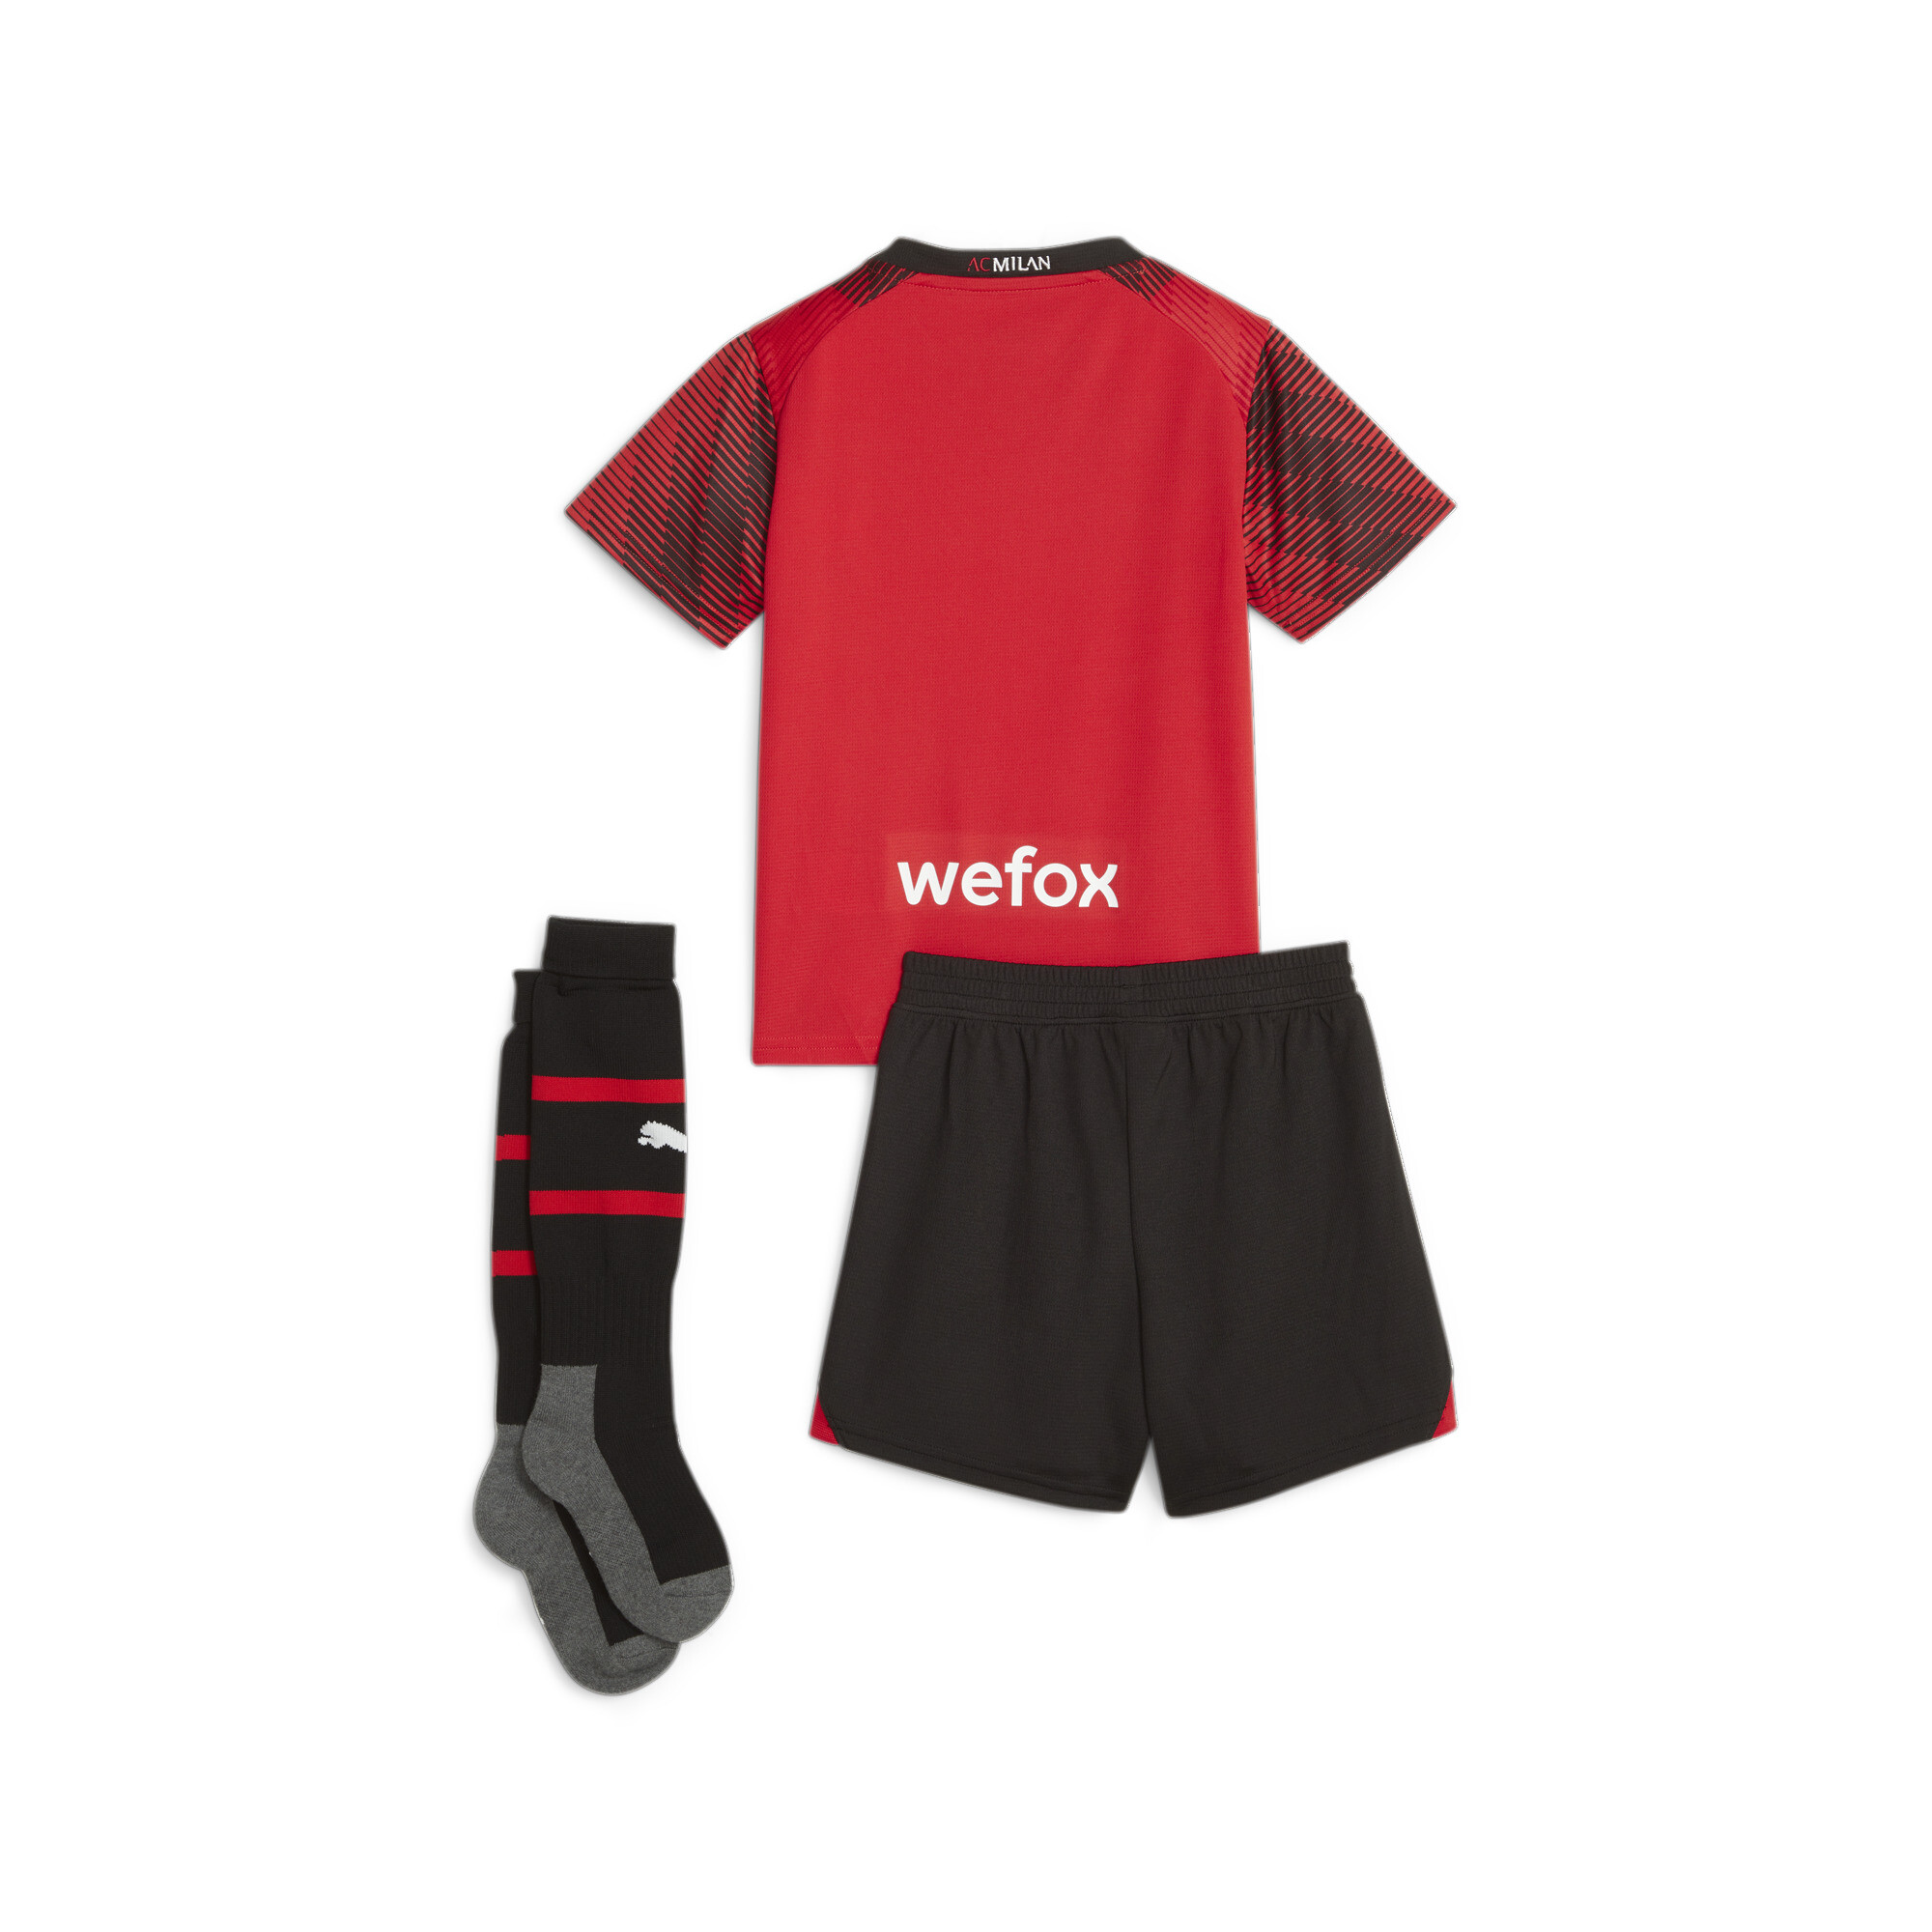 Kids' PUMA A.C. Milan 23/24 Home Mini Kit In Red, Size 2-3 Months